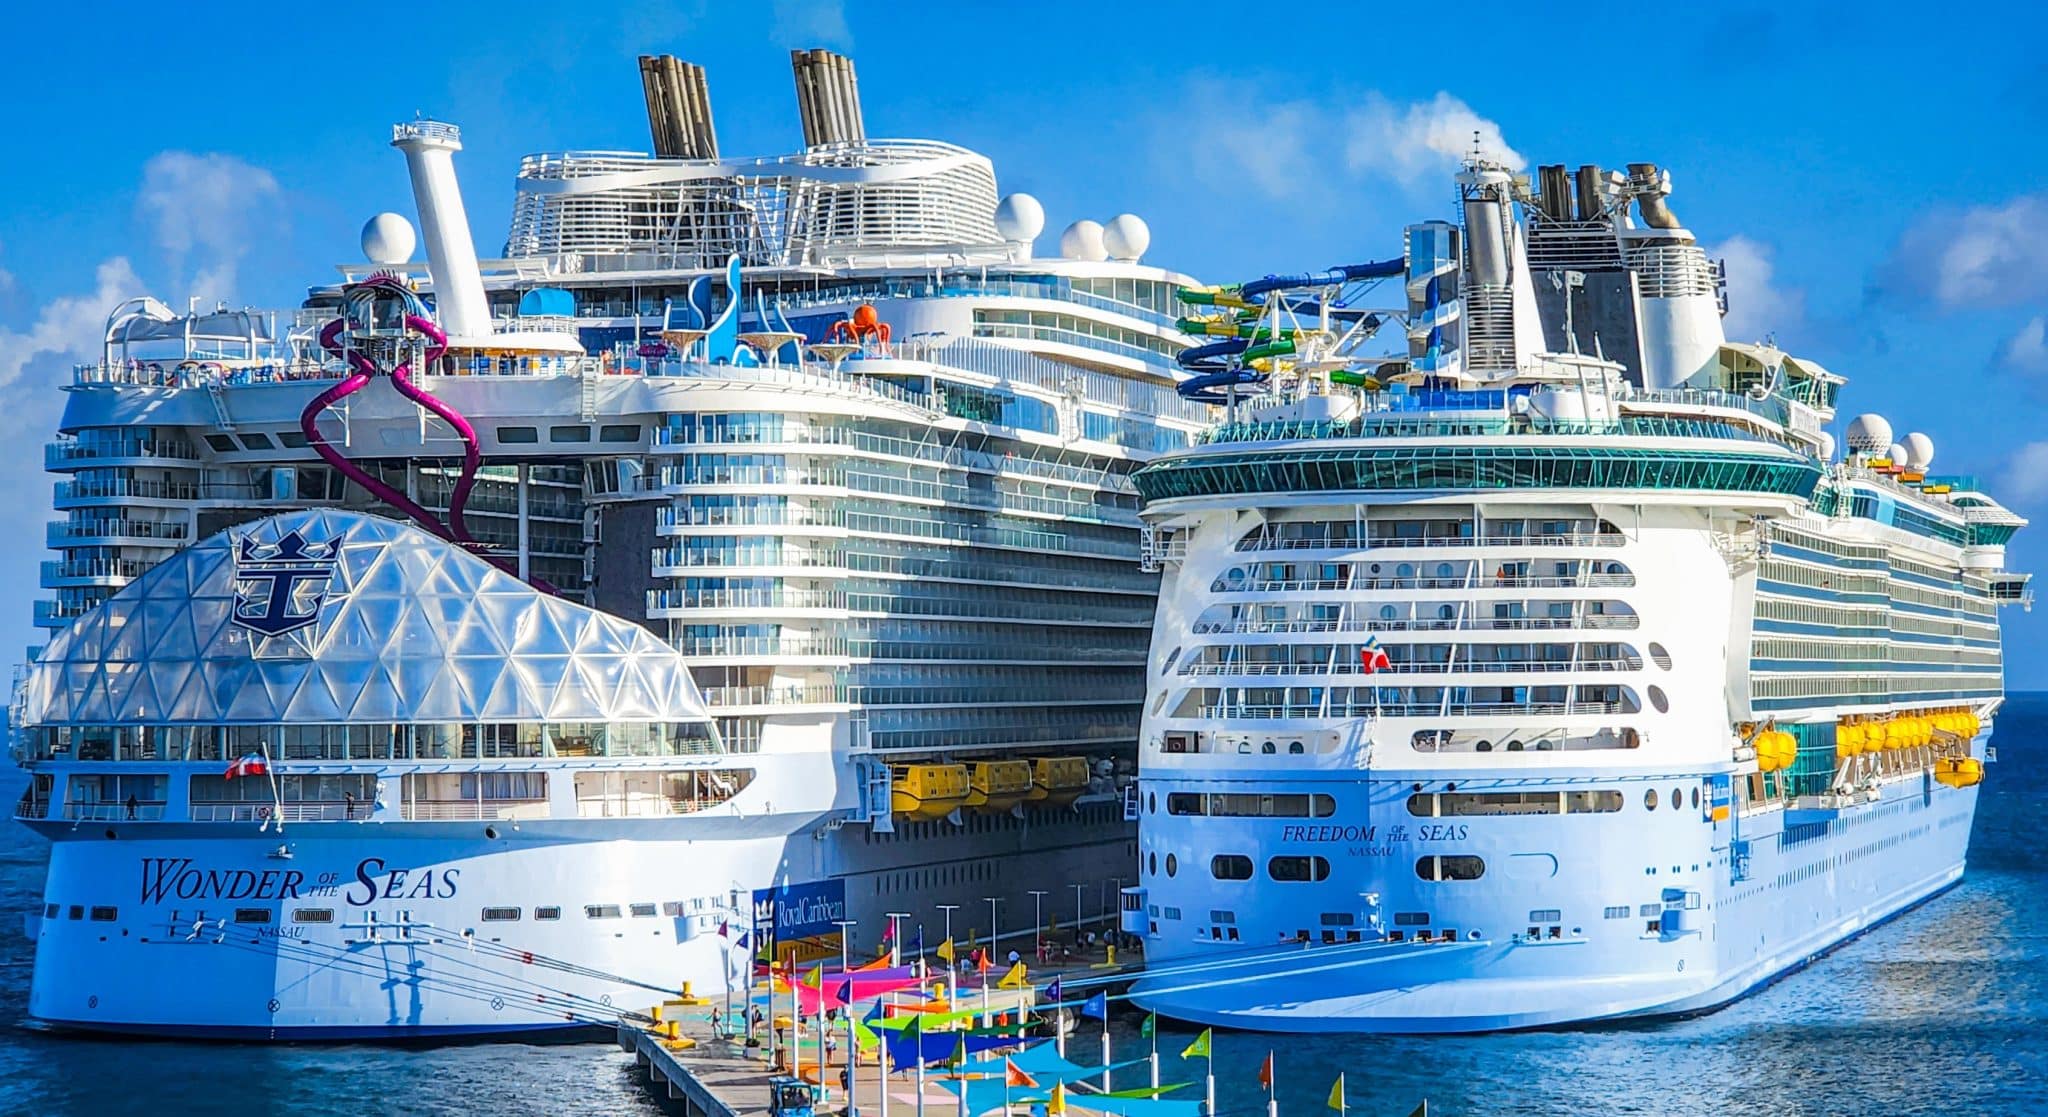 Royal Caribbean cruise ships docked at CocoCay: Wonder of the Seas and Freedom of the Seas